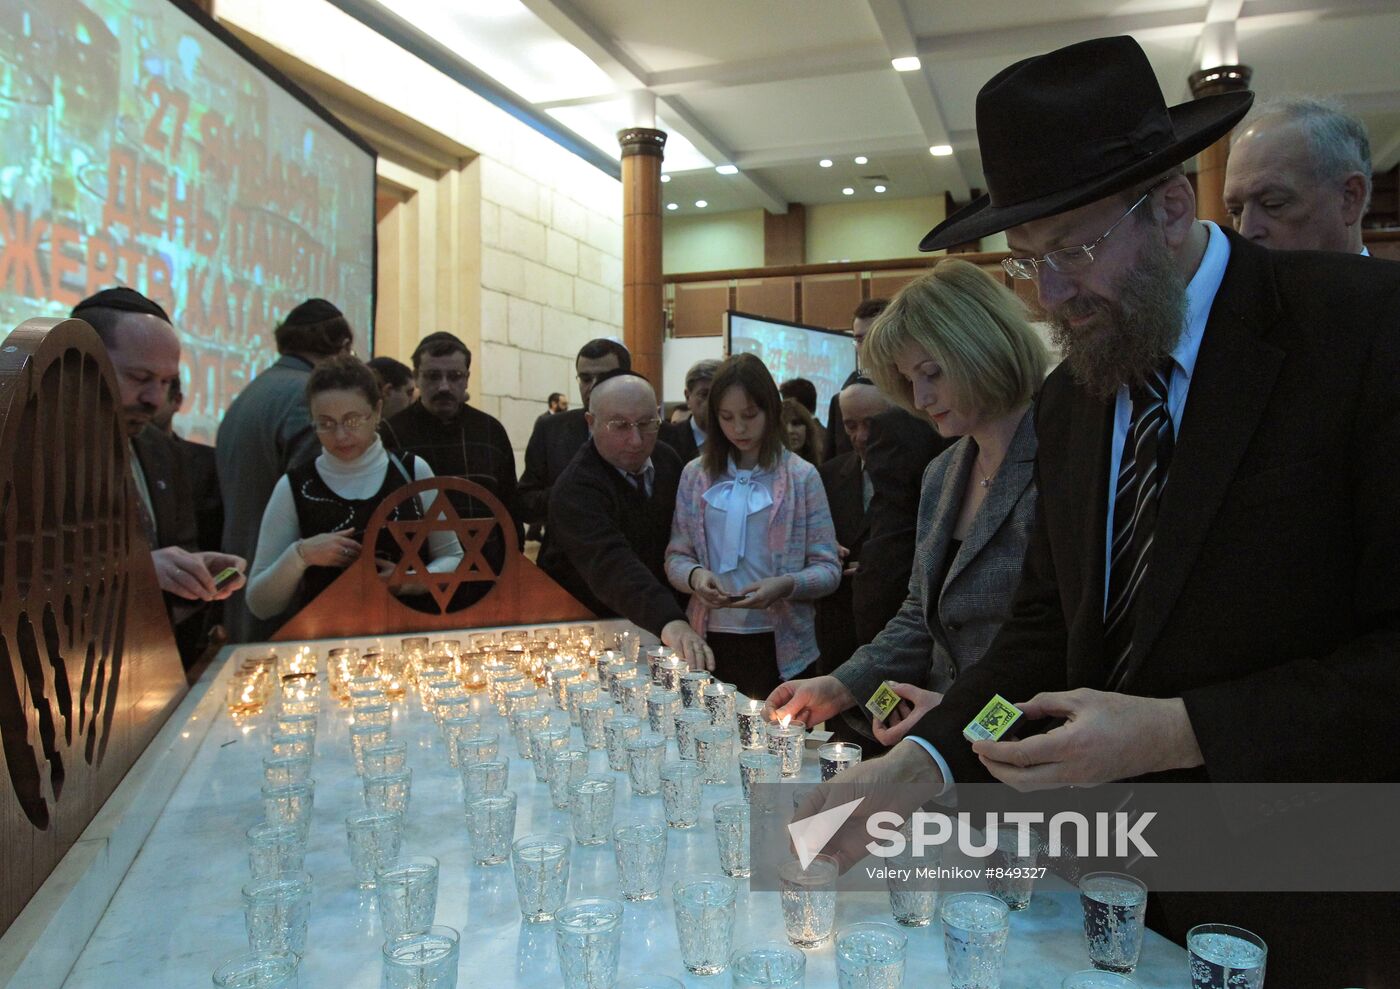 Candlelight Ceremony in Commemoration of Holocaust victims